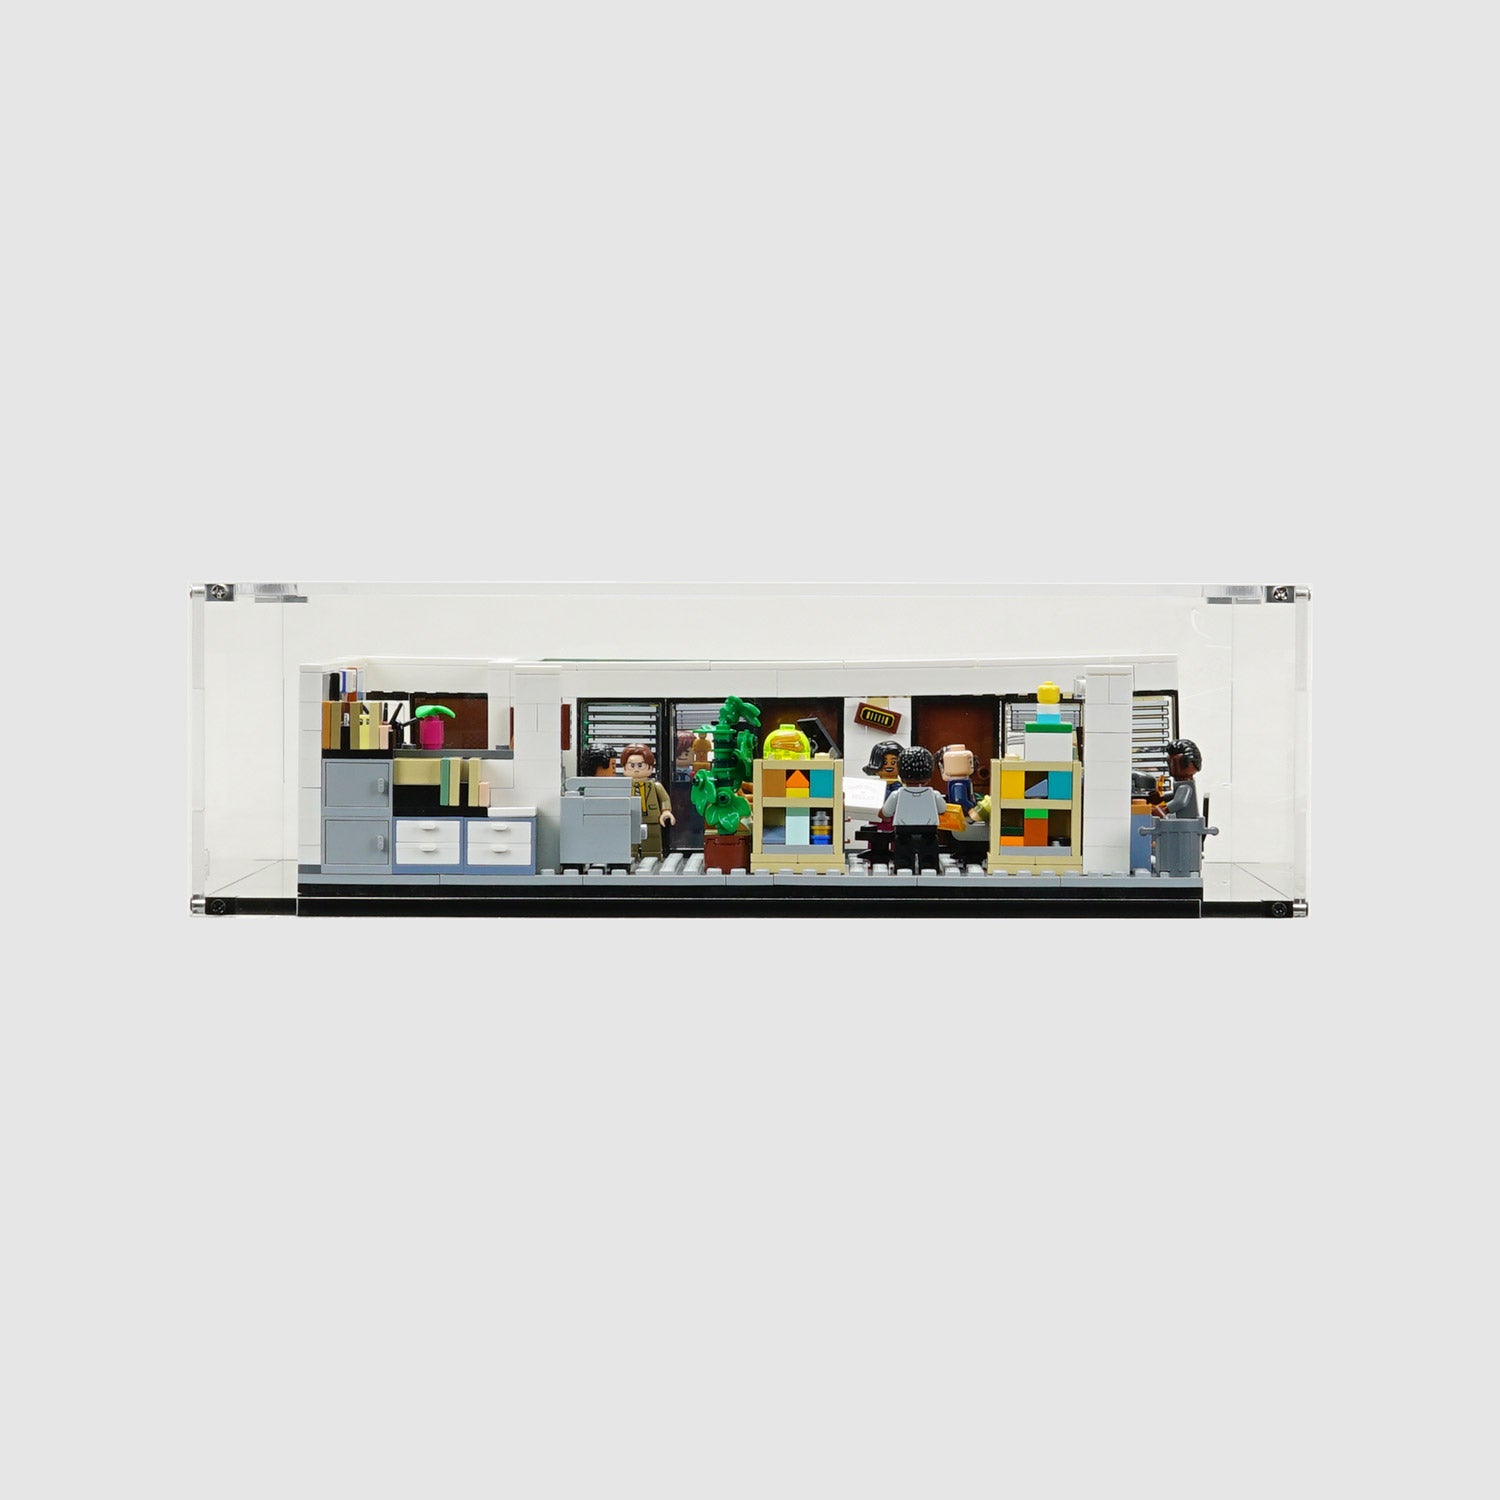 LEGO 21336 The Office Display Case | ONBRICK